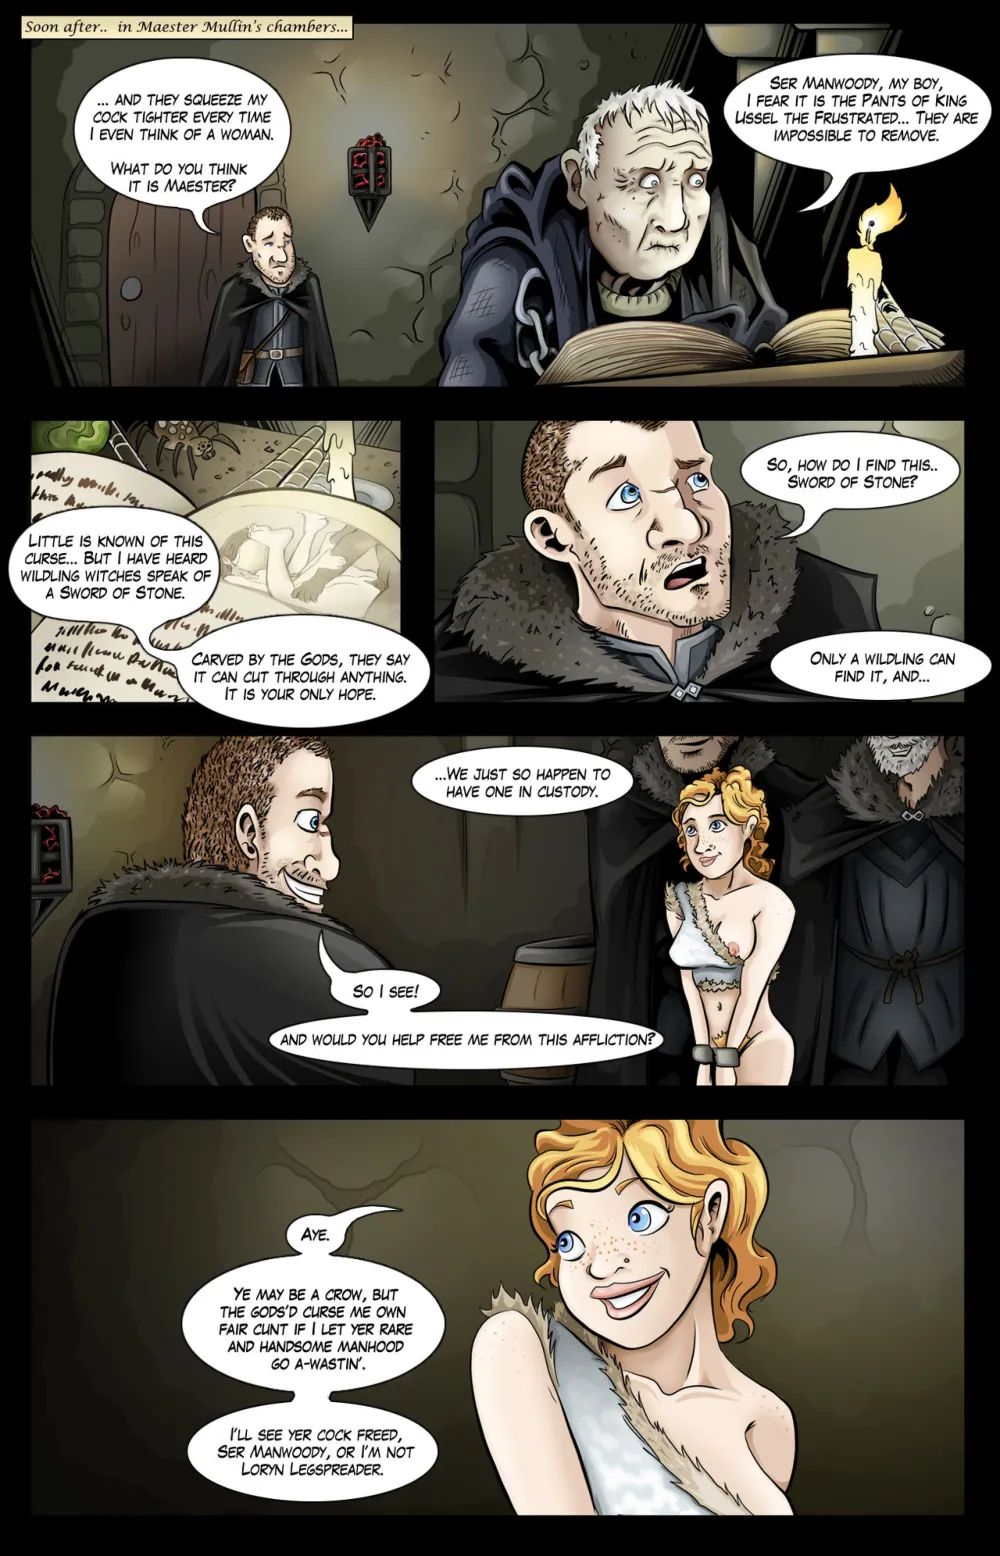 A Sword of Stone - Page 3